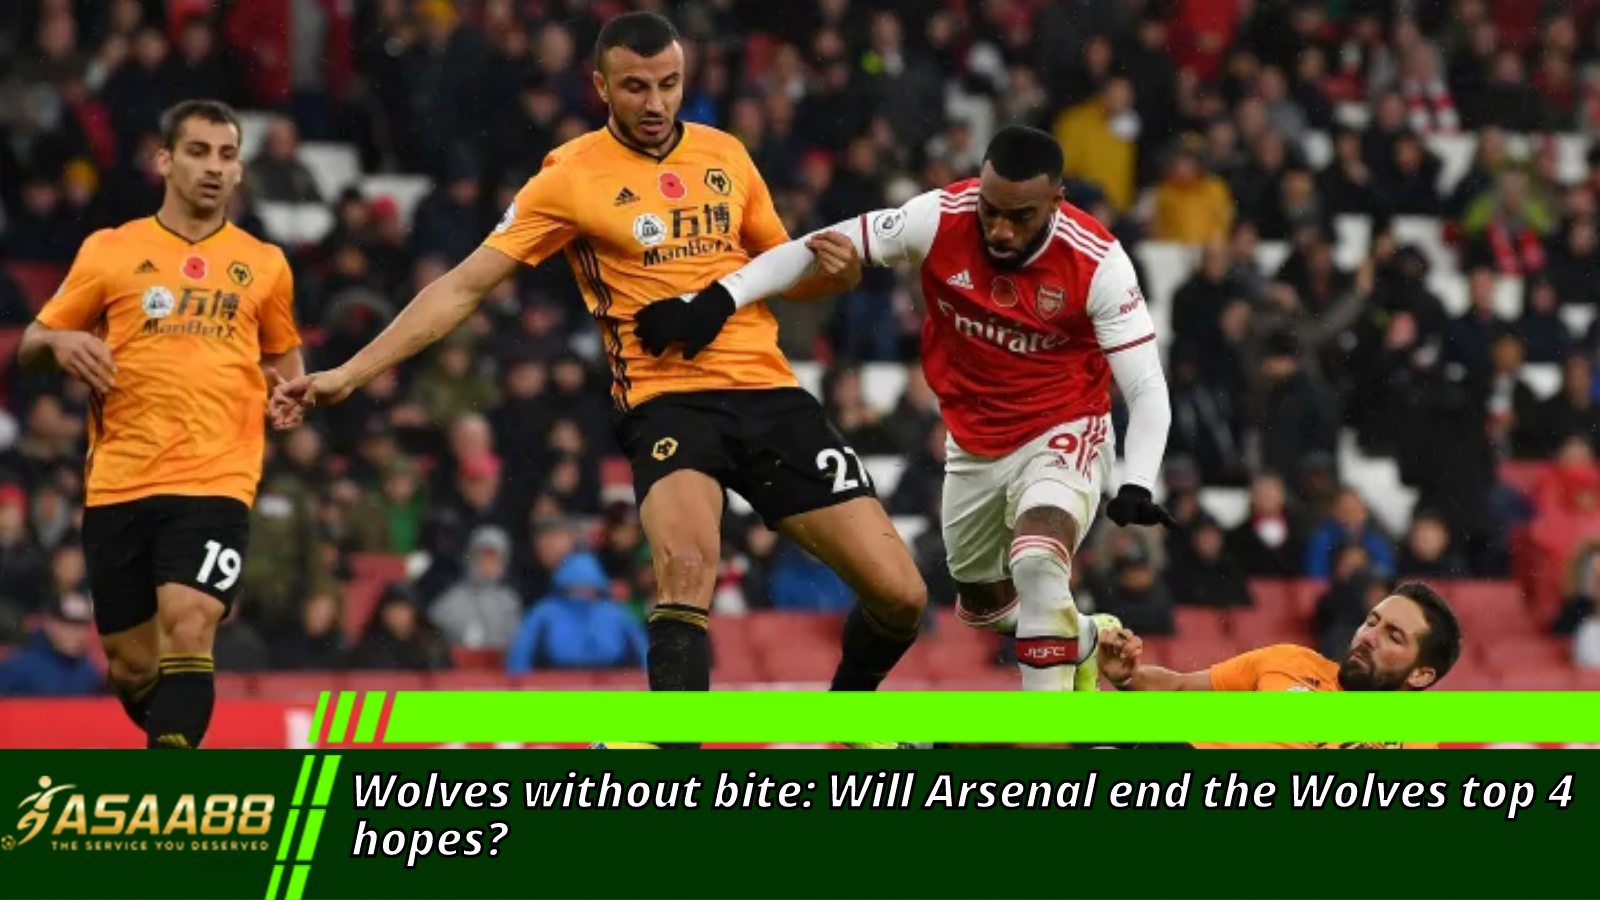 Wolves without bite: Will Arsenal end the Wolves top 4 hopes?